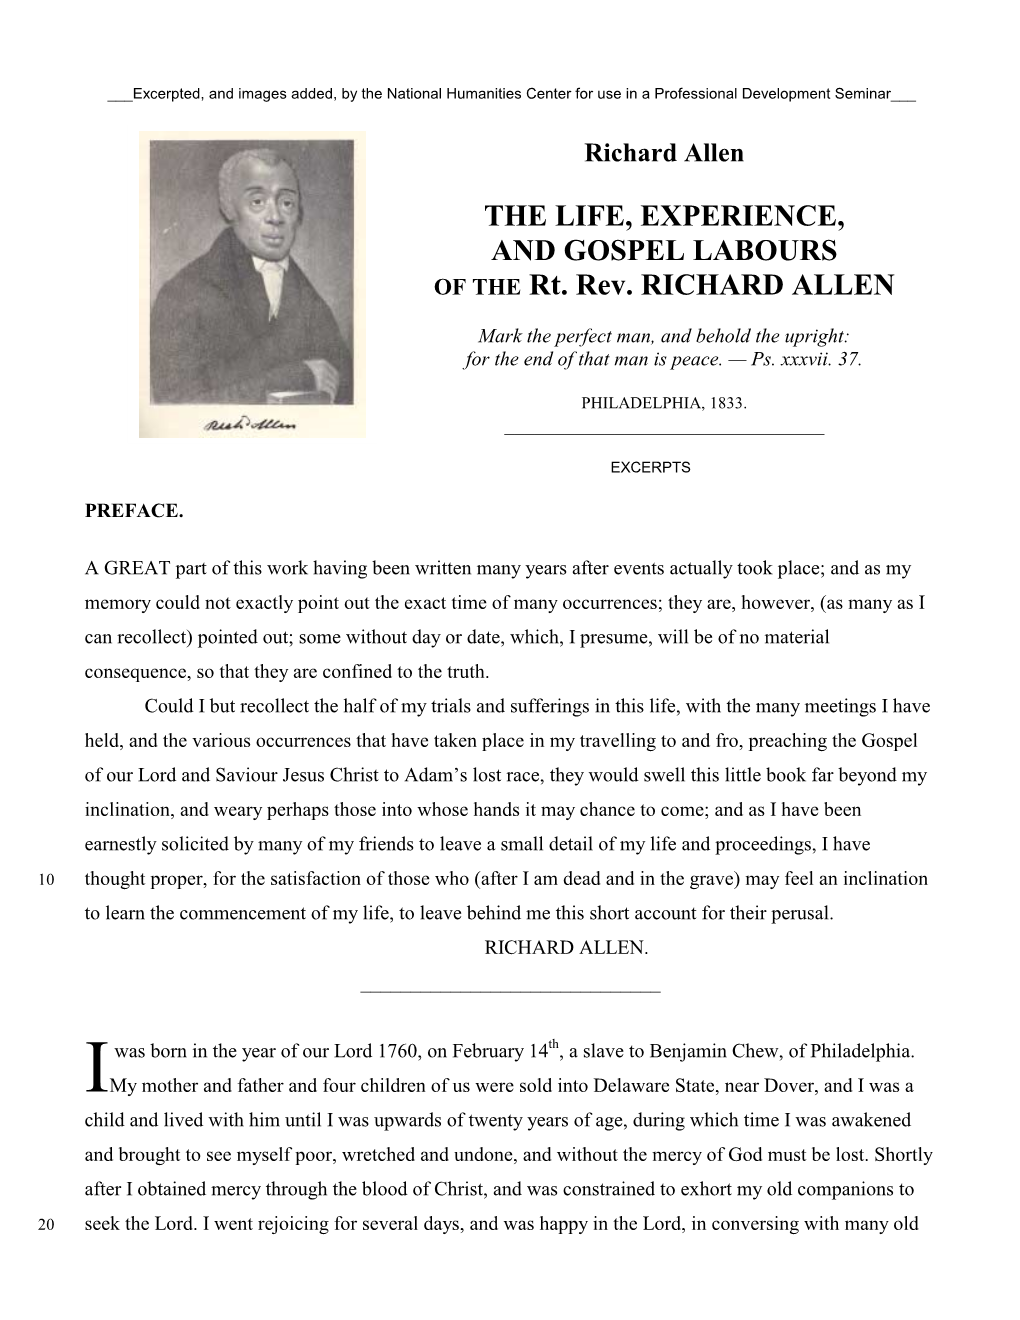 Richard Allen, the Life, Experience, and Gospel Labours of the Rt. Rev